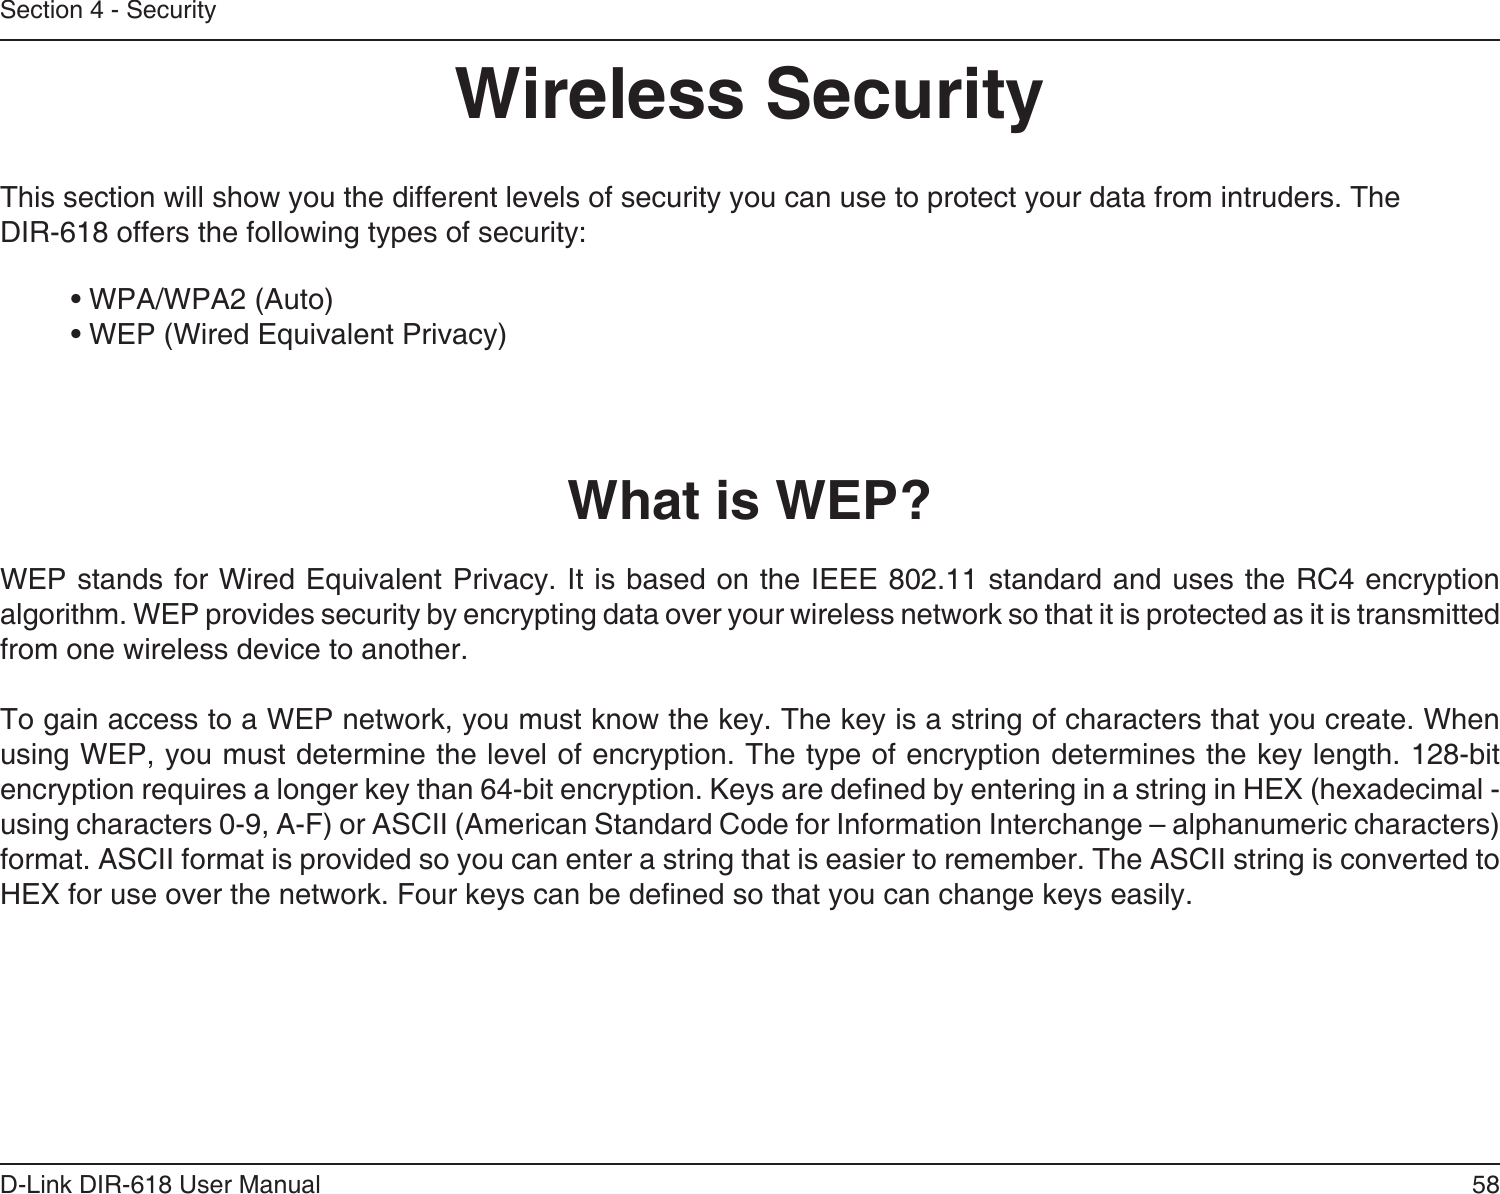 58D-Link DIR-618 User ManualSection 4 - SecurityWireless SecurityThis section will show you the different levels of security you can use to protect your data from intruders. TheDIR-618 offers the following types of security:• WPA/WPA2 (Auto)   • WEP (Wired Equivalent Privacy)What is WEP?WEP stands for Wired Equivalent Privacy. It is based on the IEEE 802.11 standard and uses the RC4 encryptionalgorithm. WEP provides security by encrypting data over your wireless network so that it is protected as it is transmittedfrom one wireless device to another.To gain access to a WEP network, you must know the key. The key is a string of characters that you create. When using WEP, you must determine the level of encryption. The type of encryption determines the key length. 128-bit encryption requires a longer key than 64-bit encryption. Keys are dened by entering in a string in HEX (hexadecimal - using characters 0-9, A-F) or ASCII (American Standard Code for Information Interchange – alphanumeric characters) format. ASCII format is provided so you can enter a string that is easier to remember. The ASCII string is converted toHEX for use over the network. Four keys can be dened so that you can change keys easily.